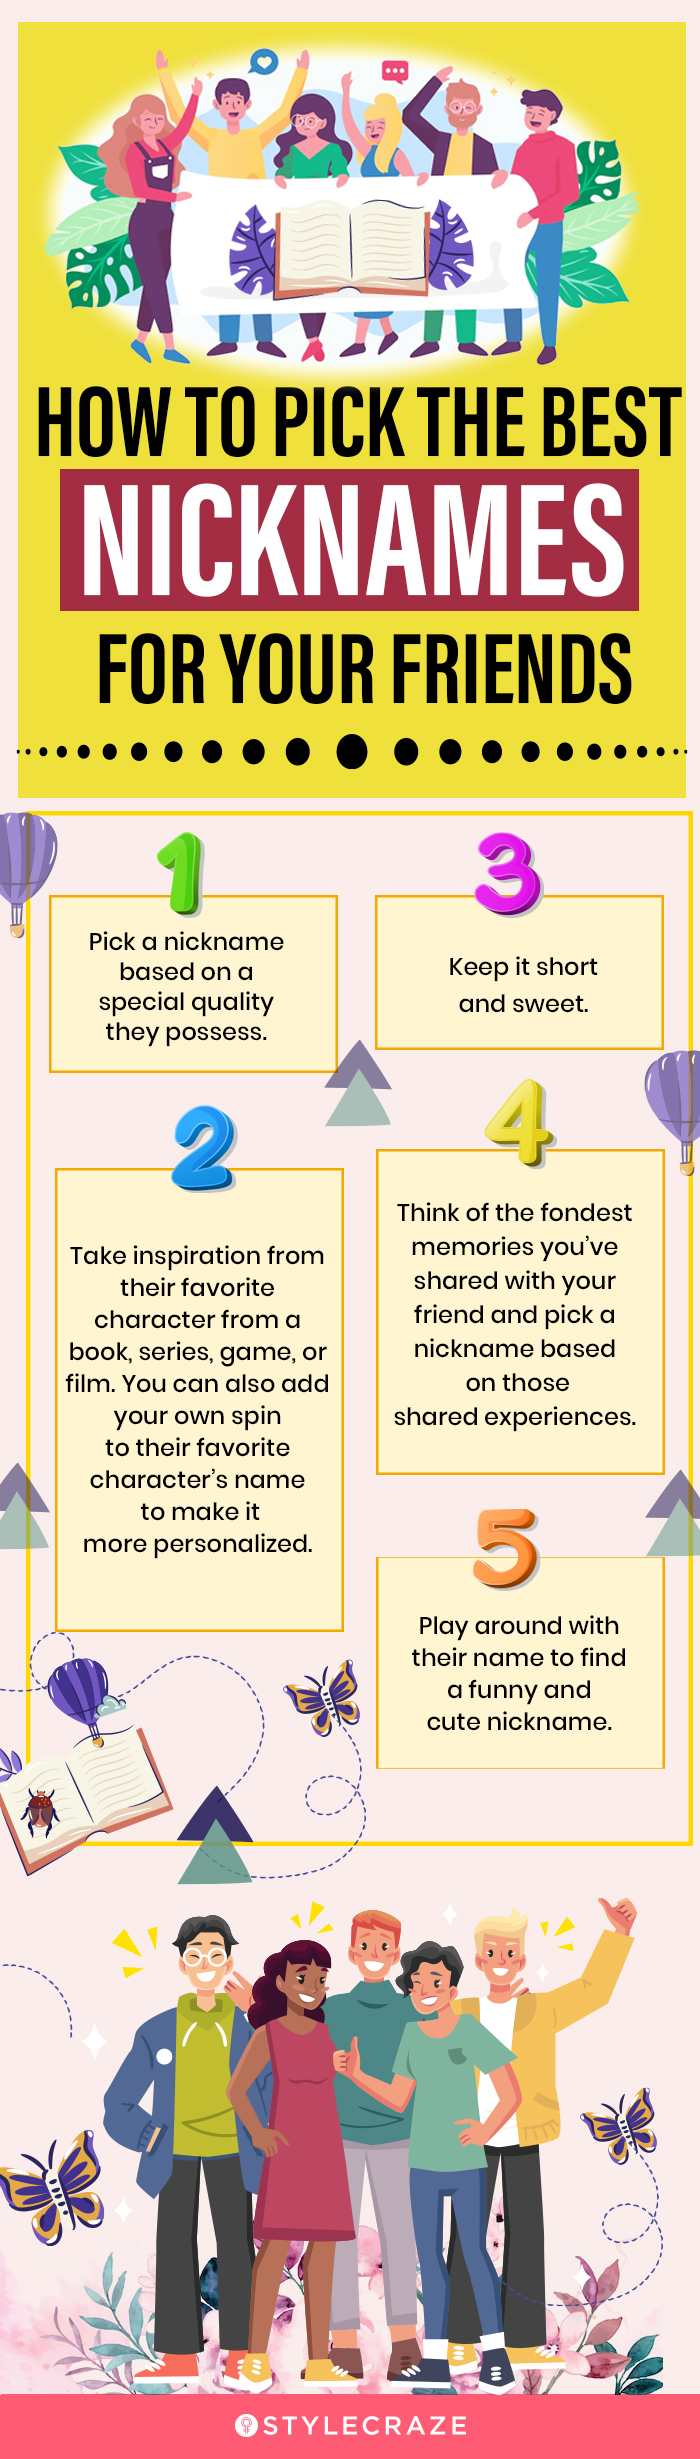 how to pick the best nicknames for your friends (infographic)